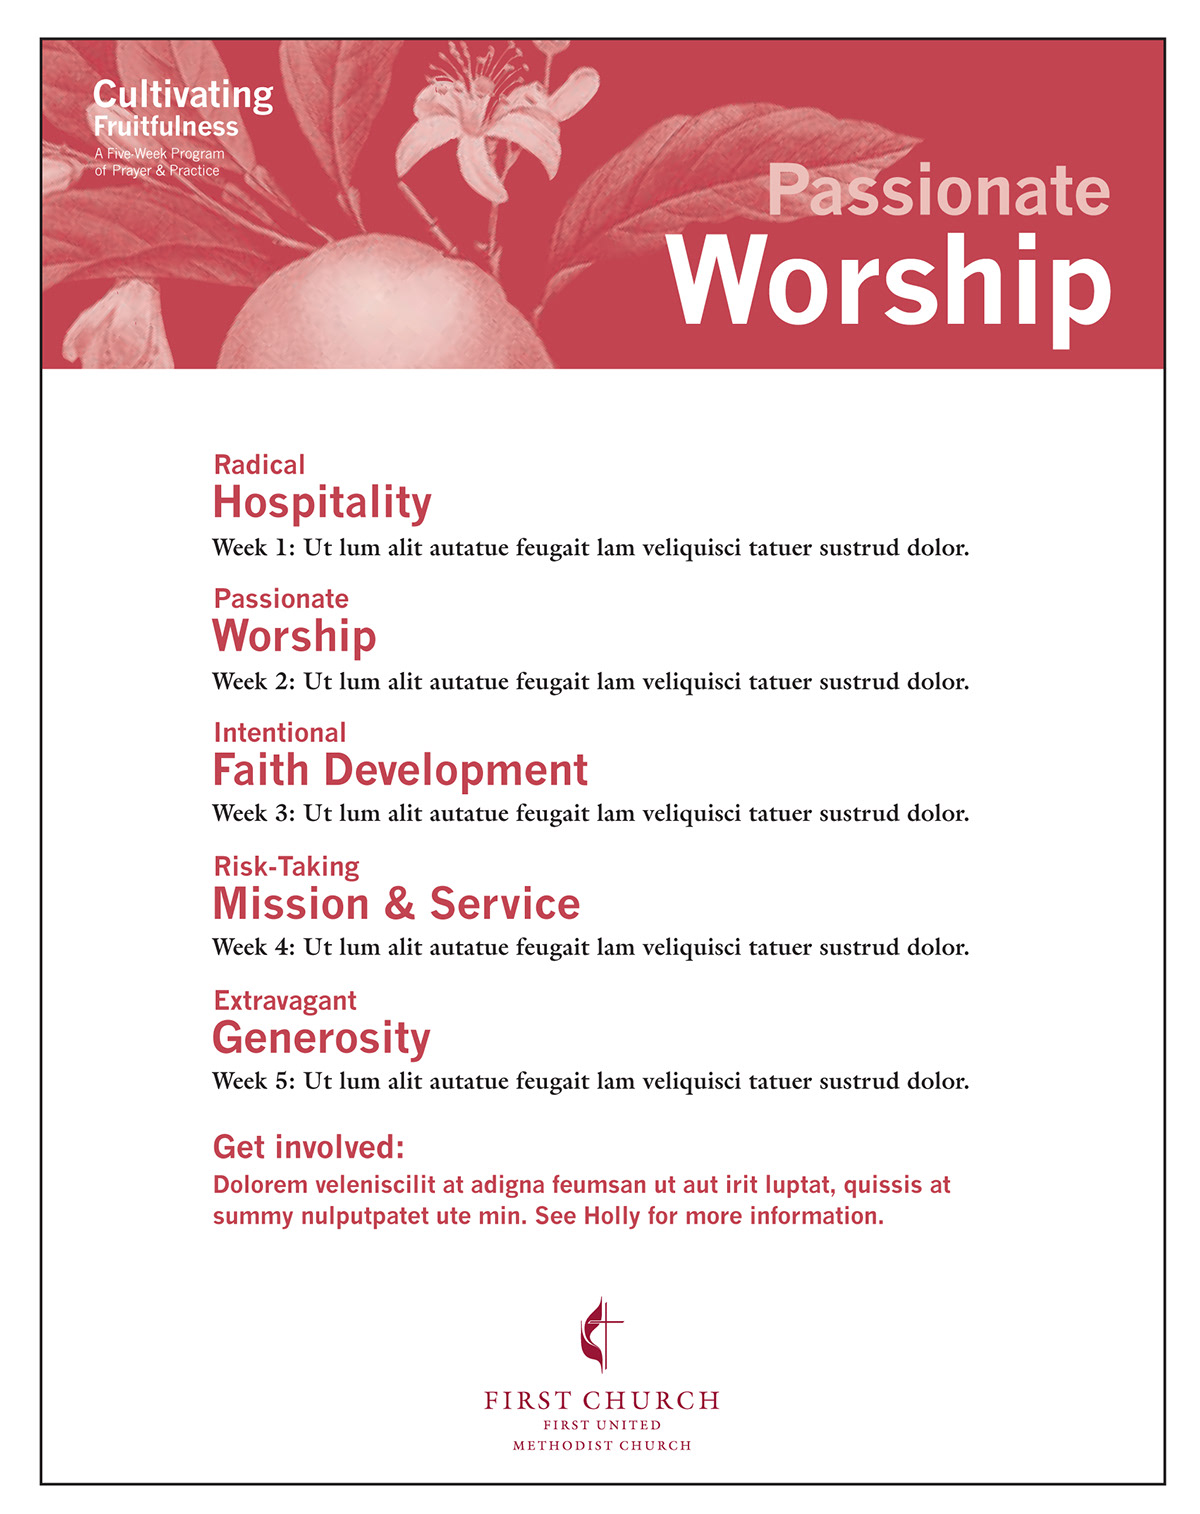 First United Methodist banners church design giving